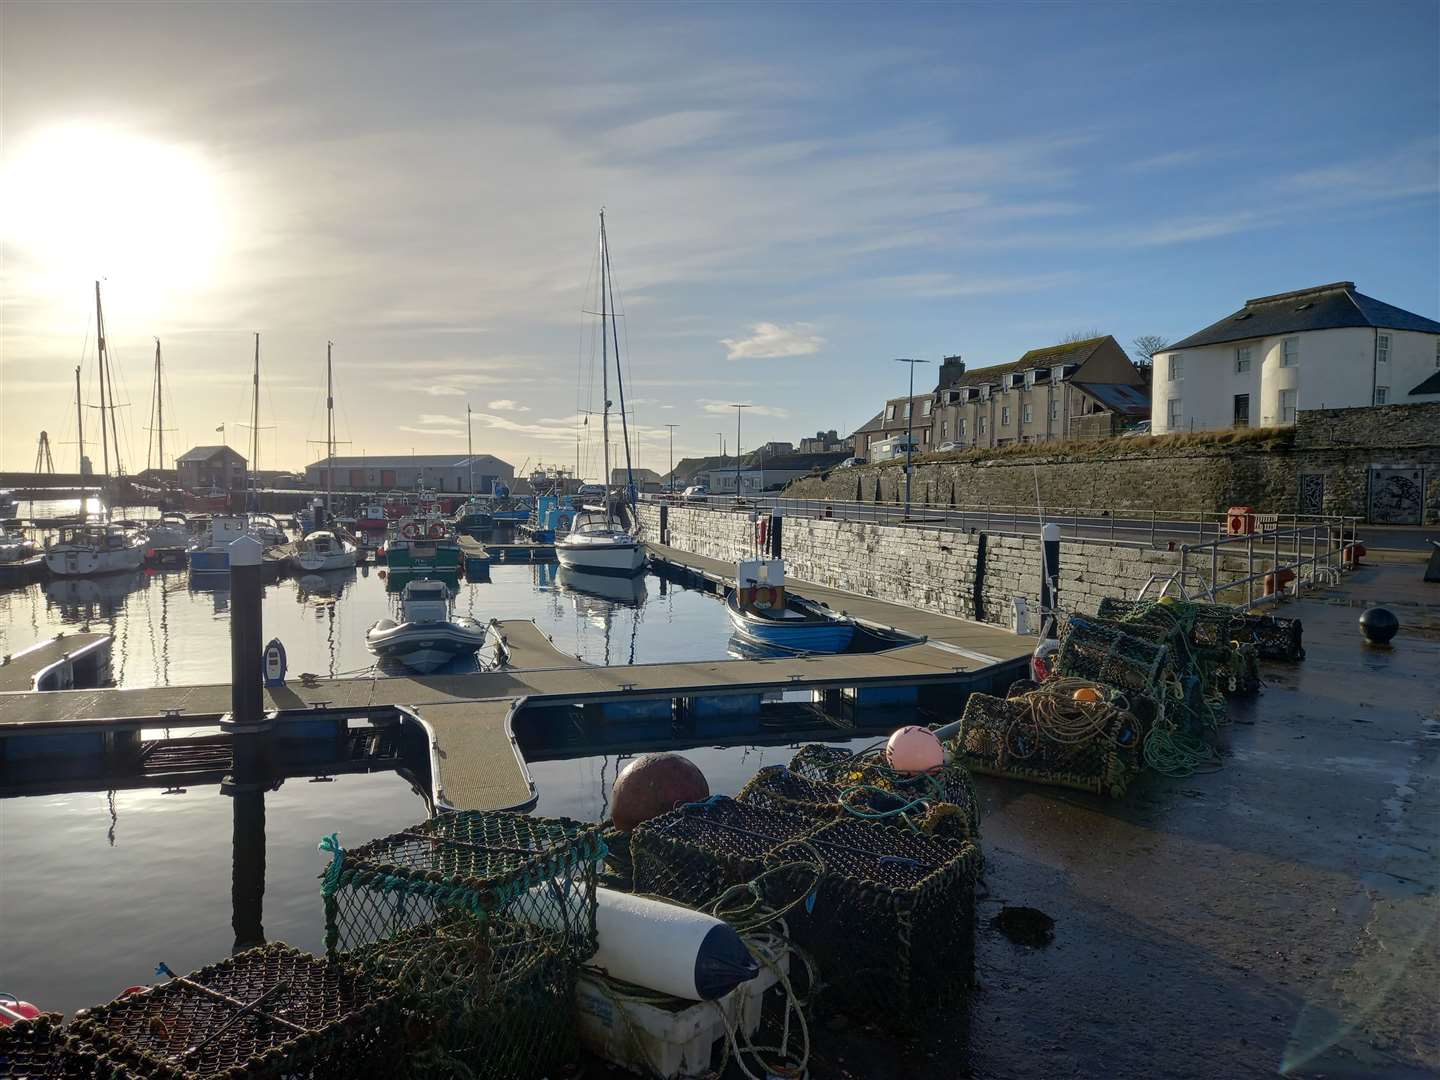 Matthew Towe sent this shot from his morning walk round Wick in the lovely spring sunshine.